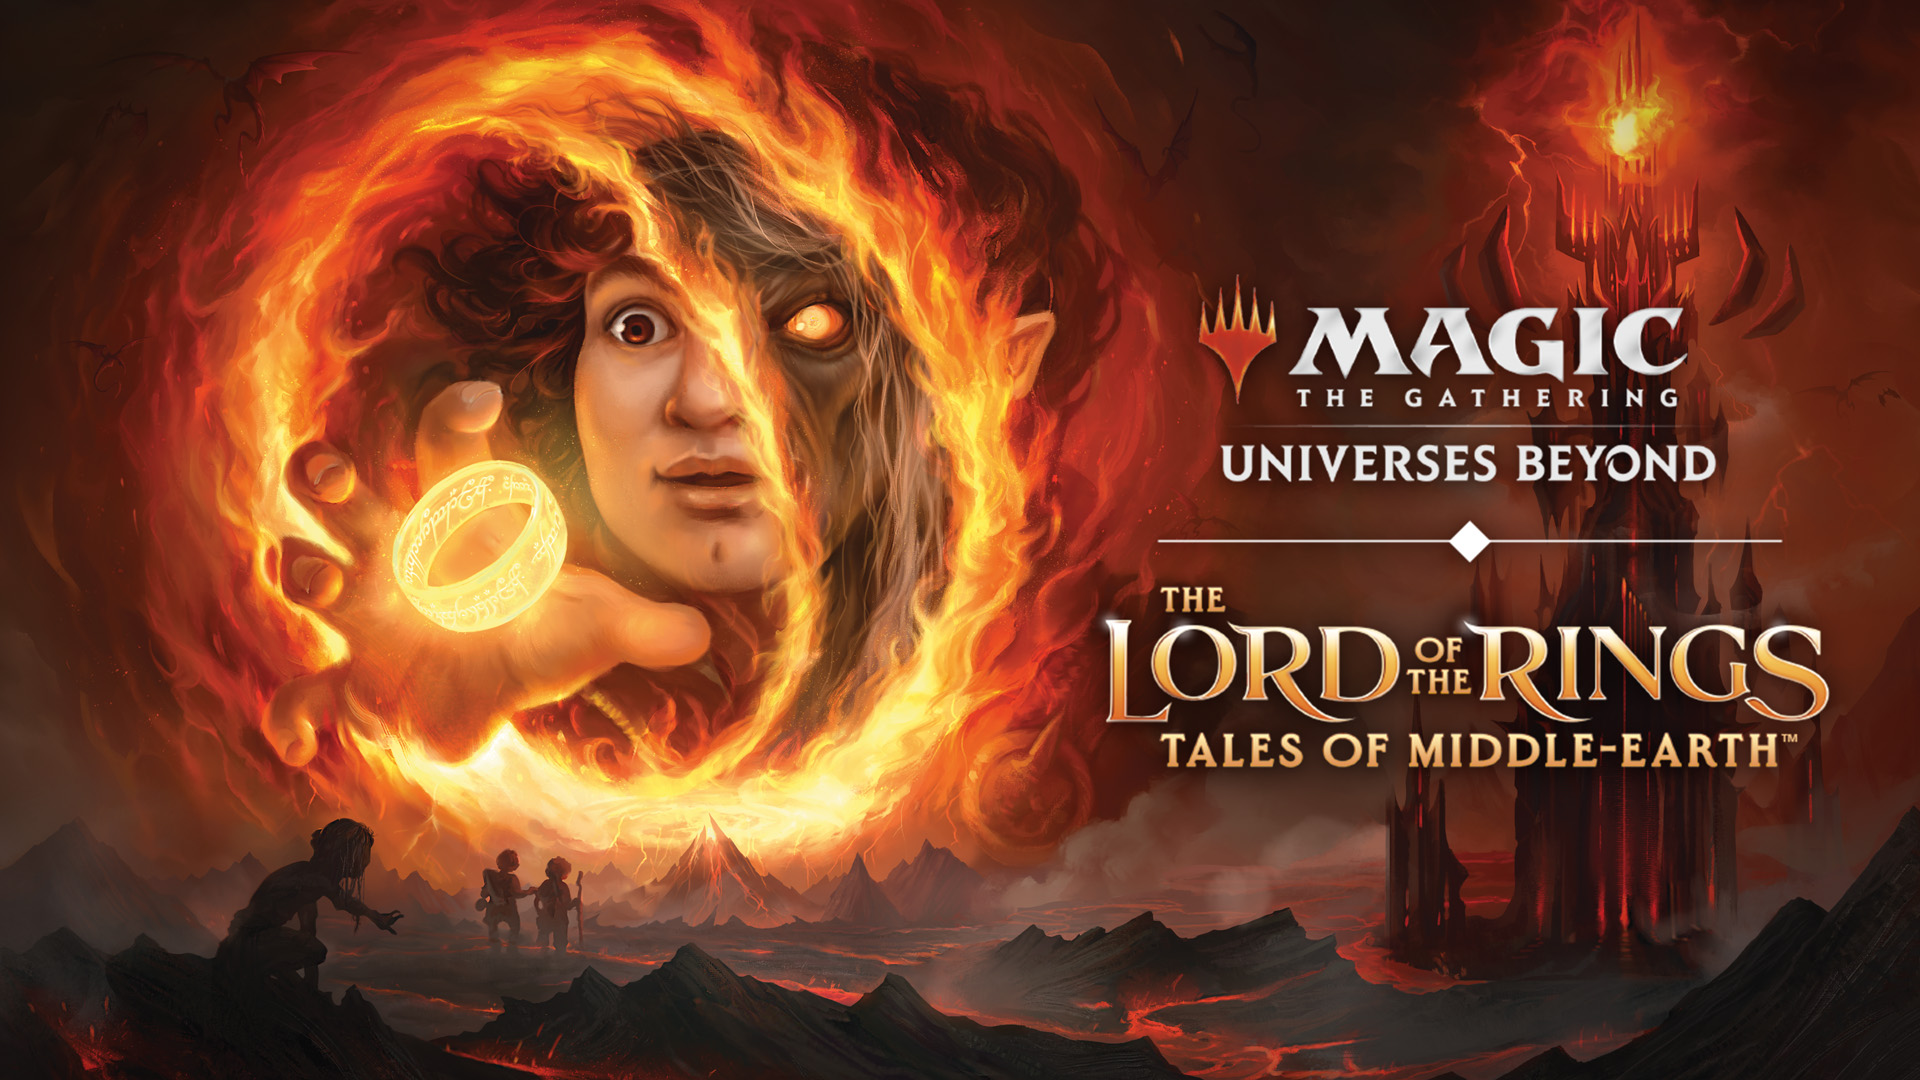 promotional image for Magic: The Gathering’s Universes Beyond series featuring Frodo (inside a flaming circle) from The Lord of the Rings